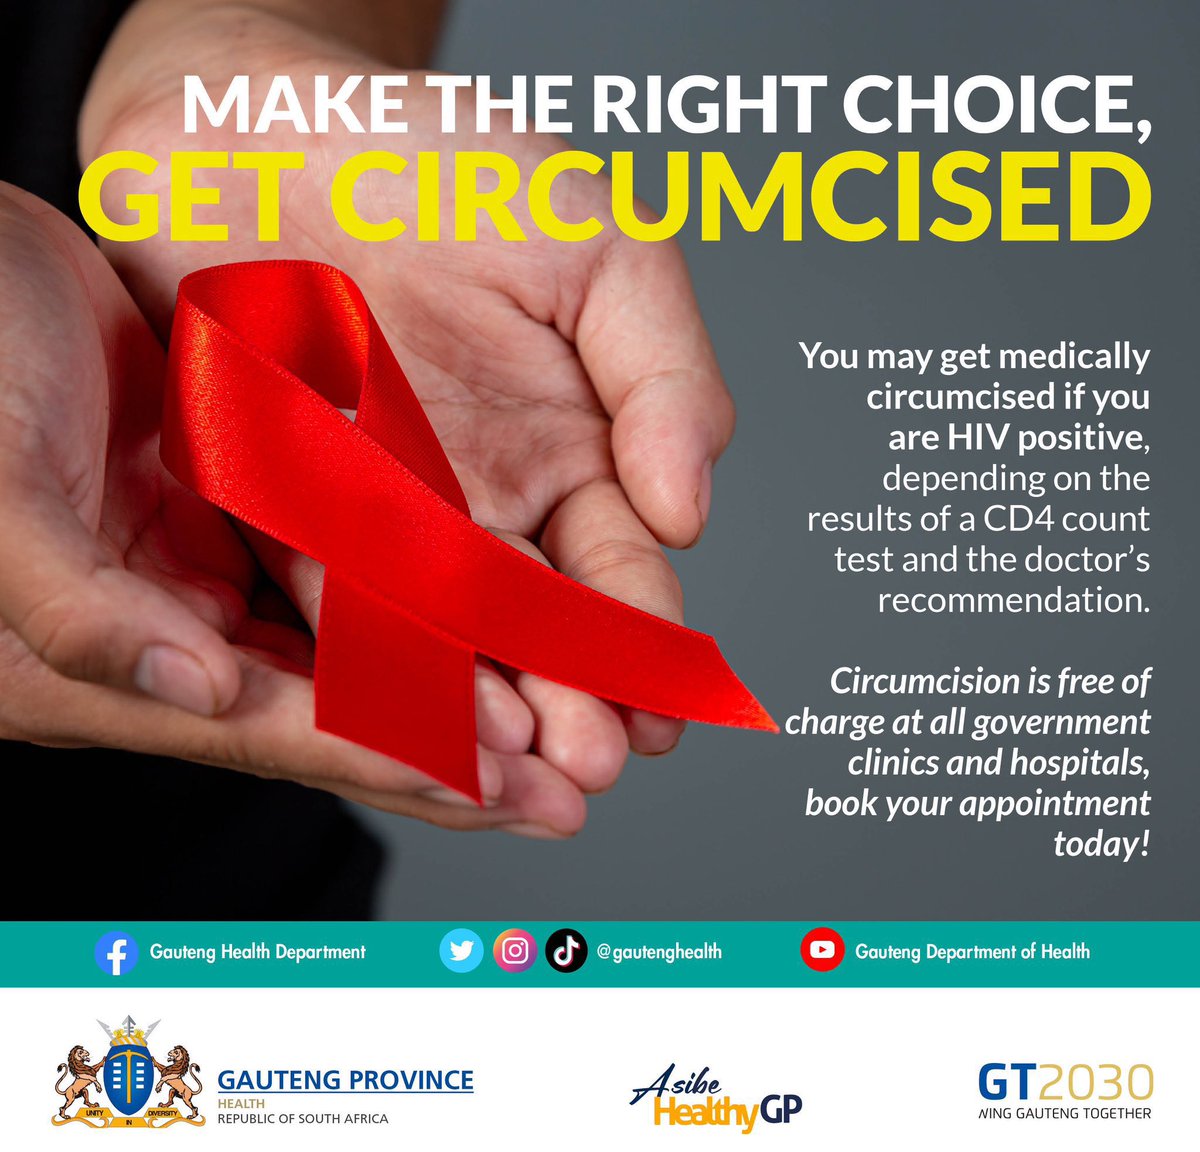 Circumcision reduces HIV infection by 60%. However, even if you’re positive, you can still get circumcised. You’ll be offered support, & if you’re not on ARVs, you’ll be initiated & a future appointment will be made for you if you’re not eligible at the time 
#MakeTheRightChoice